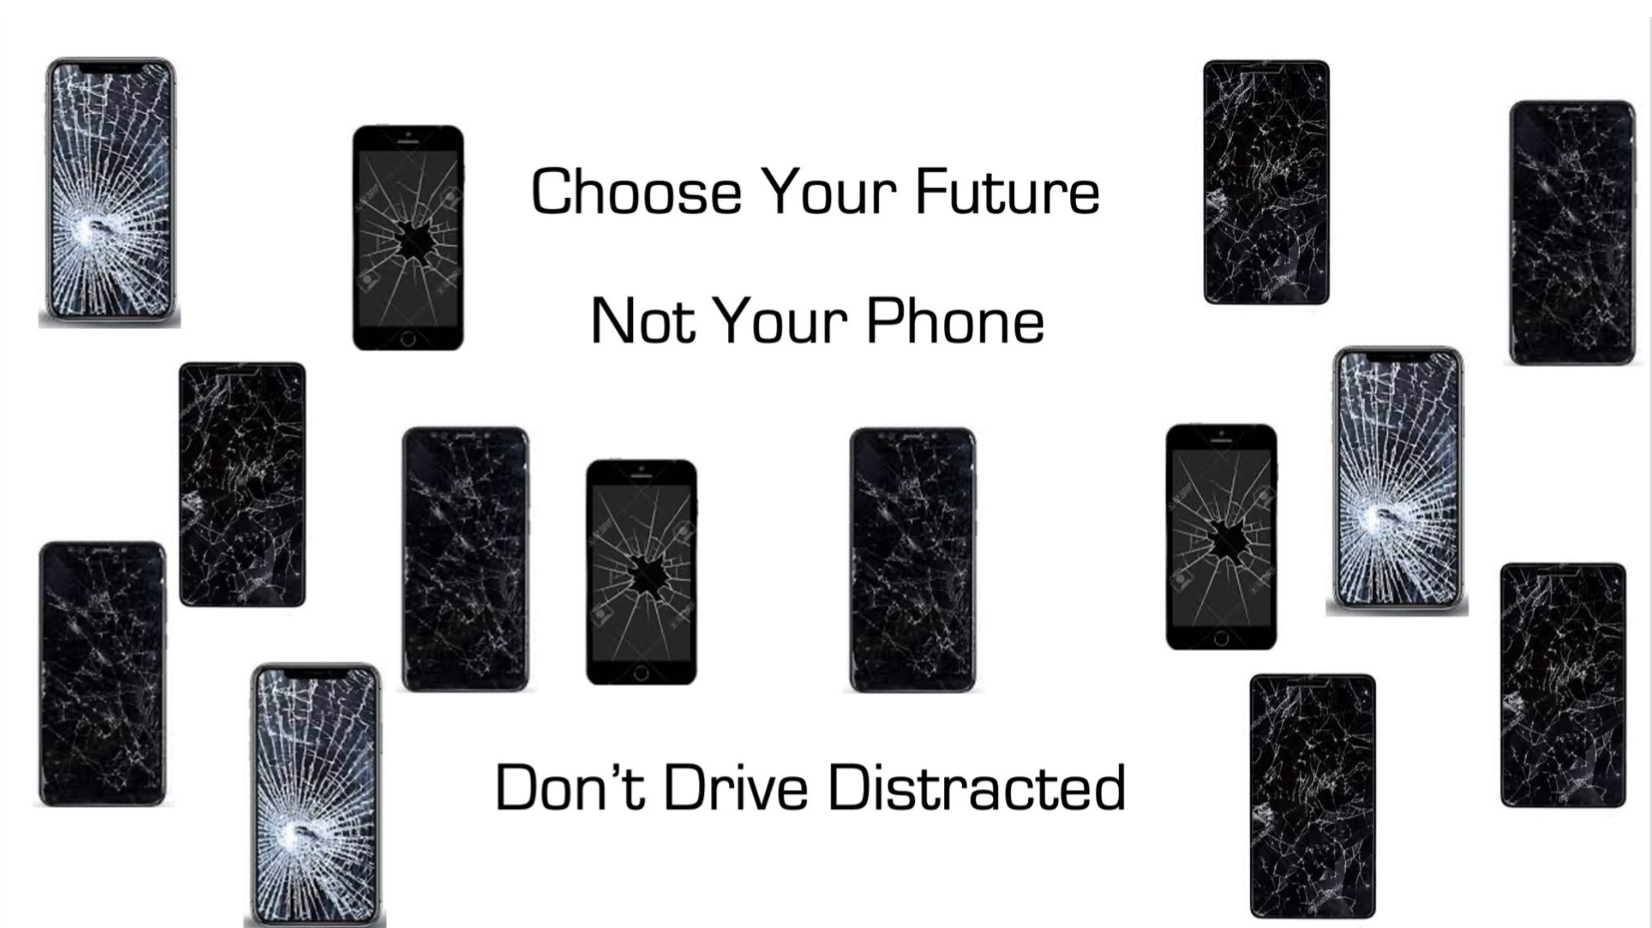 a guerilla ad concept with smashed phones